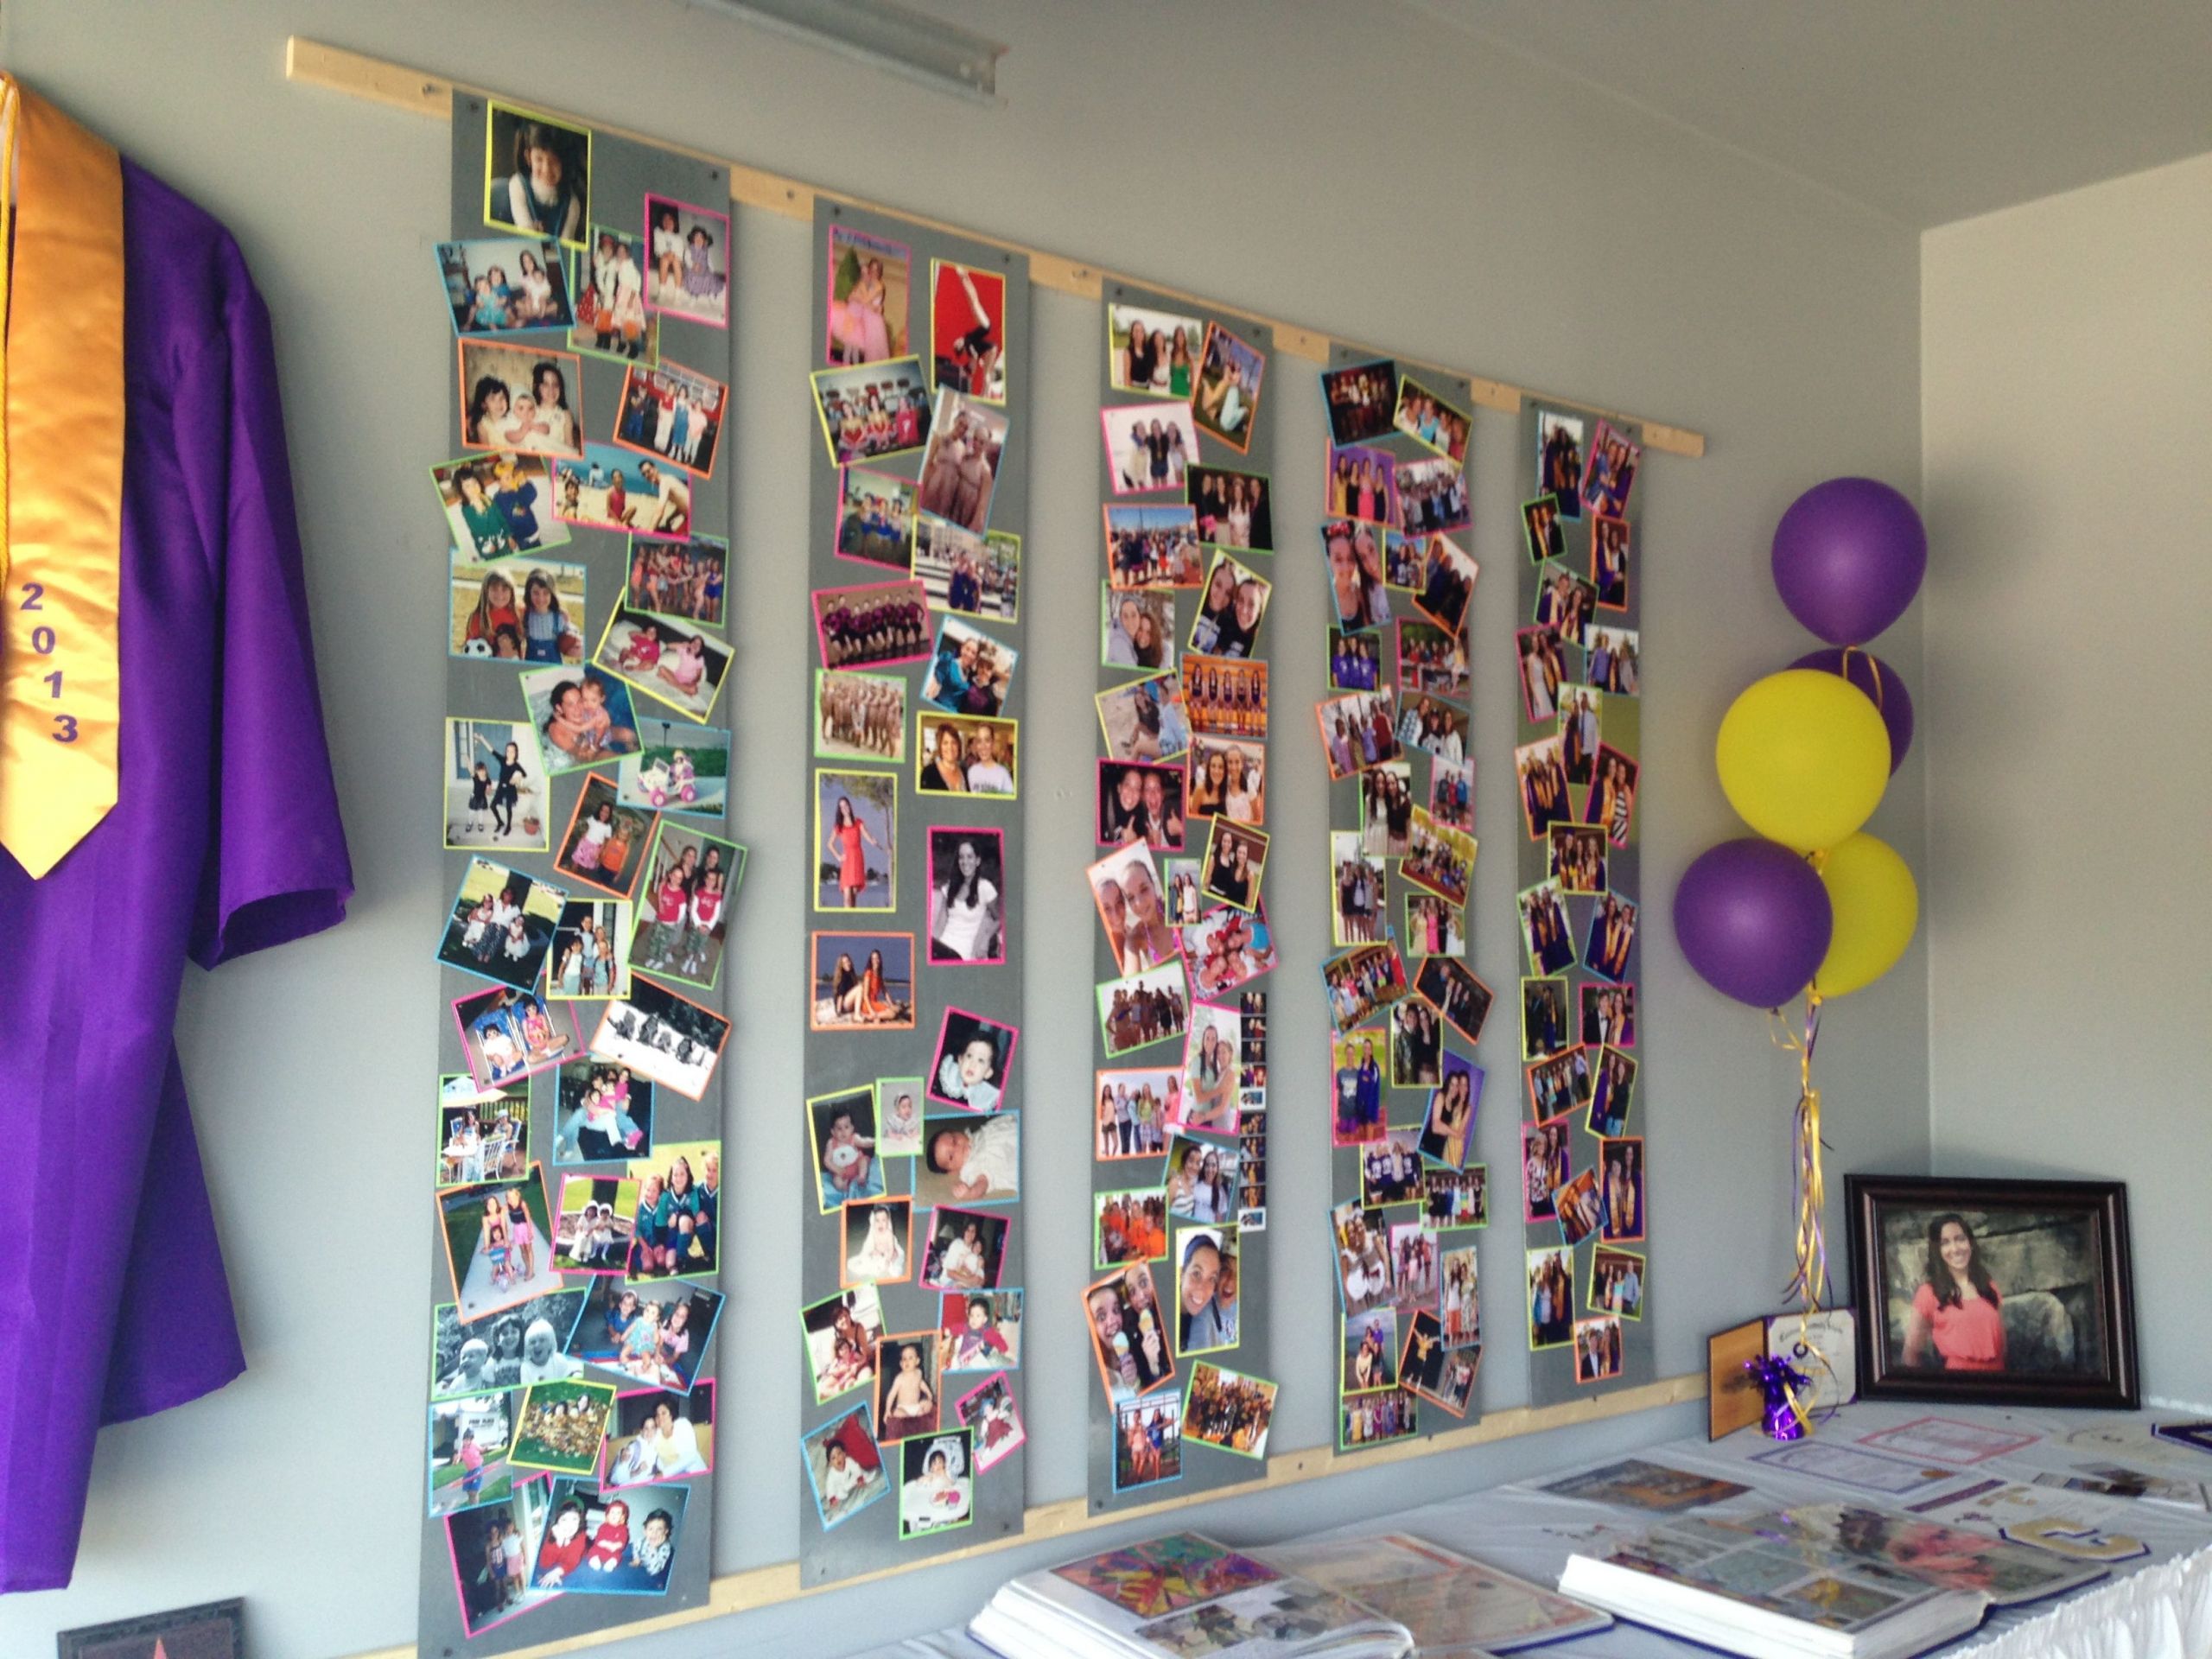 Graduation Party Display Ideas
 Awesome Graduation Display Magnet boards photos